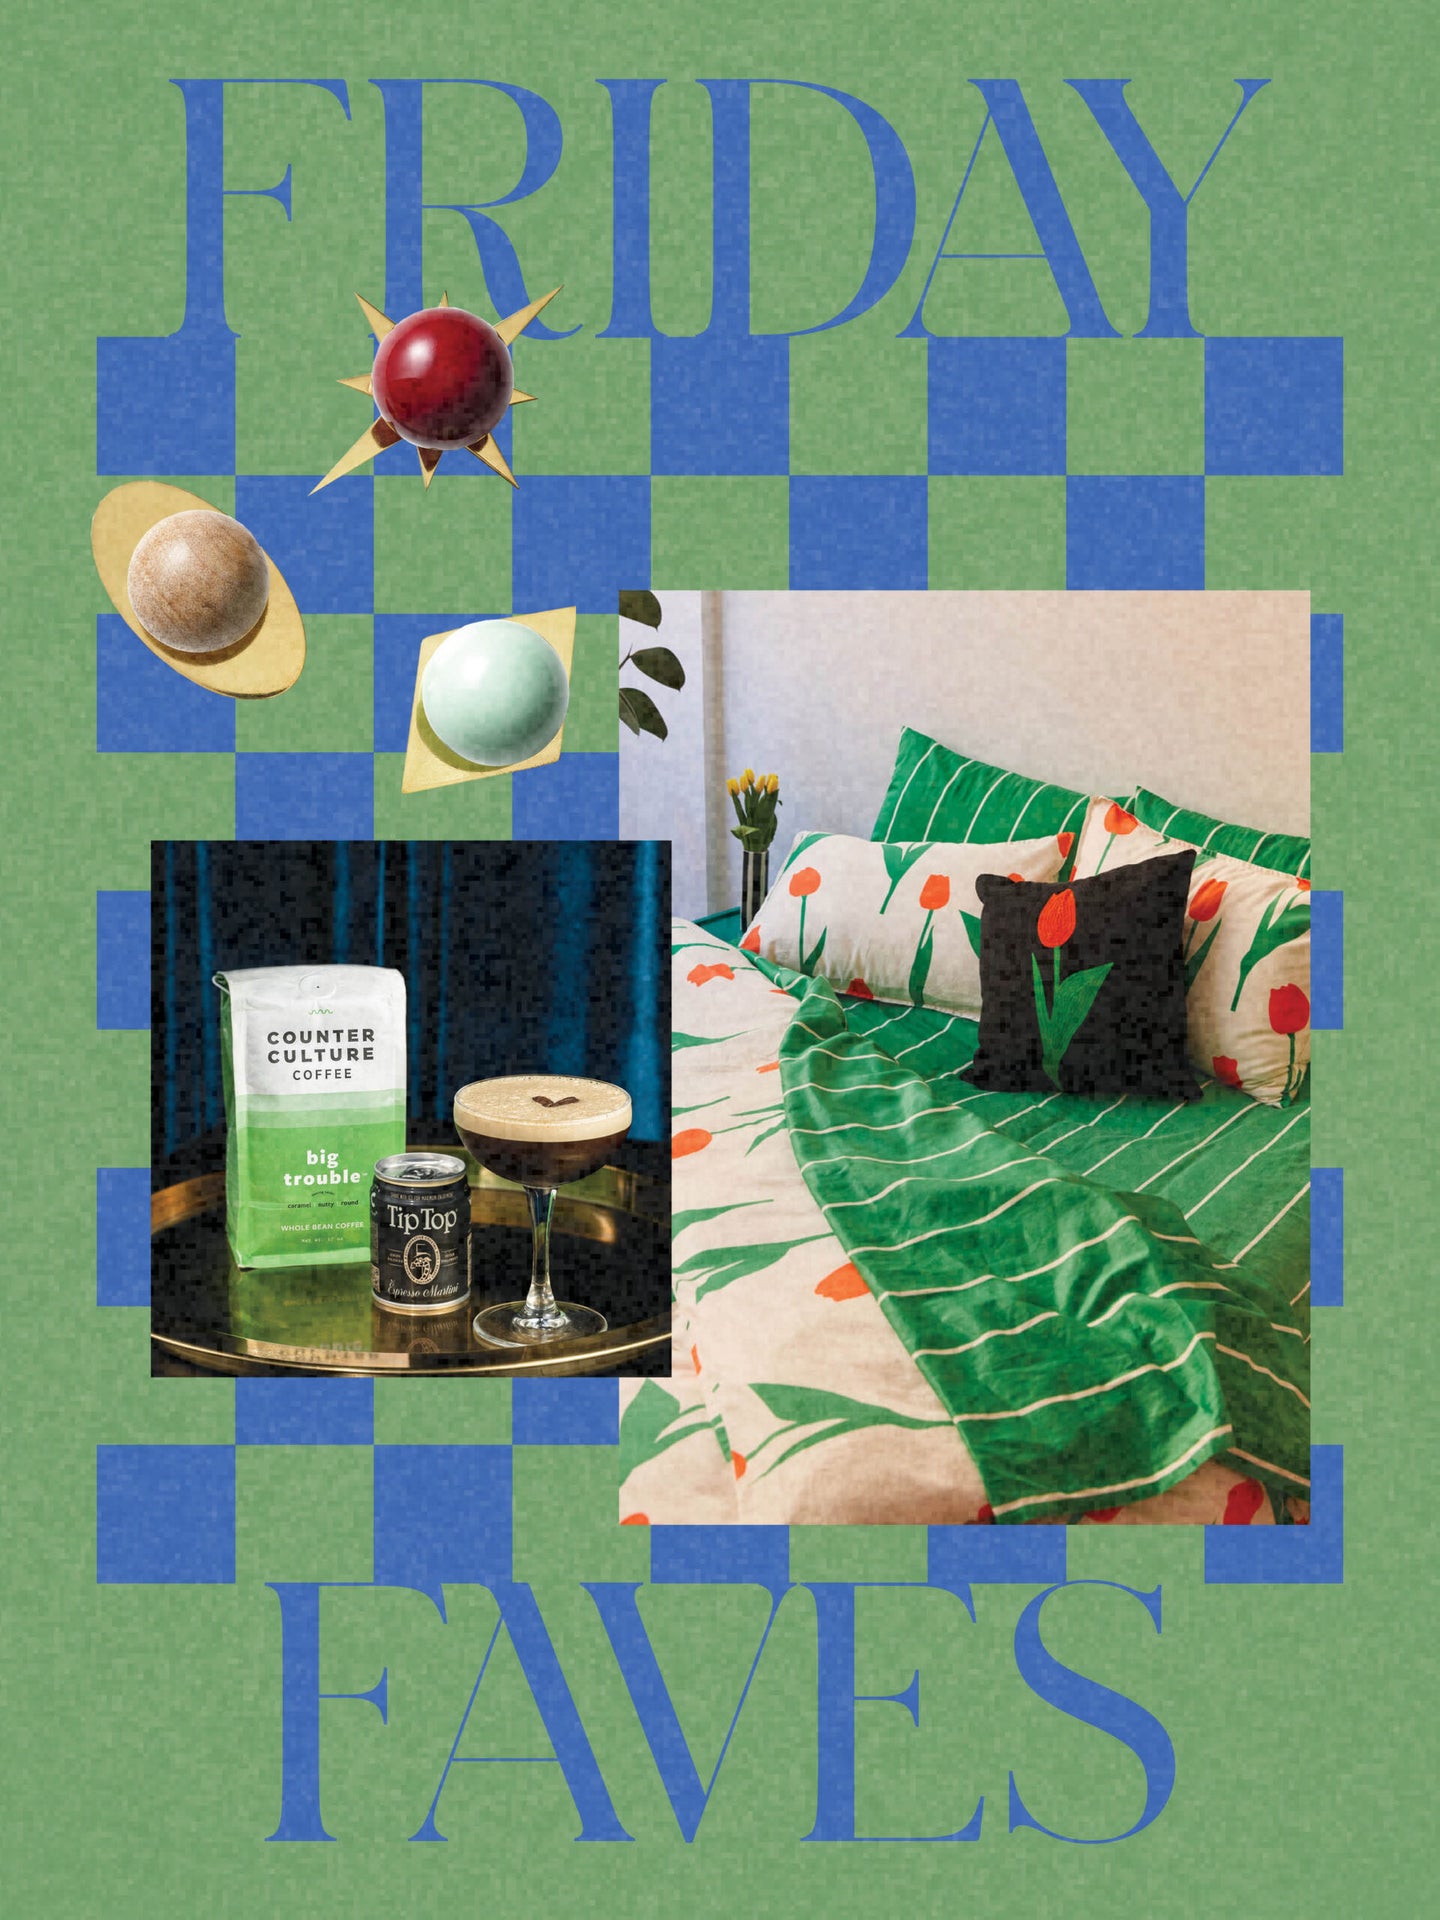 Anthro’s Newest Drop, Espresso Martinis To Go, and the Dreamiest Dusen Dusen Sheets